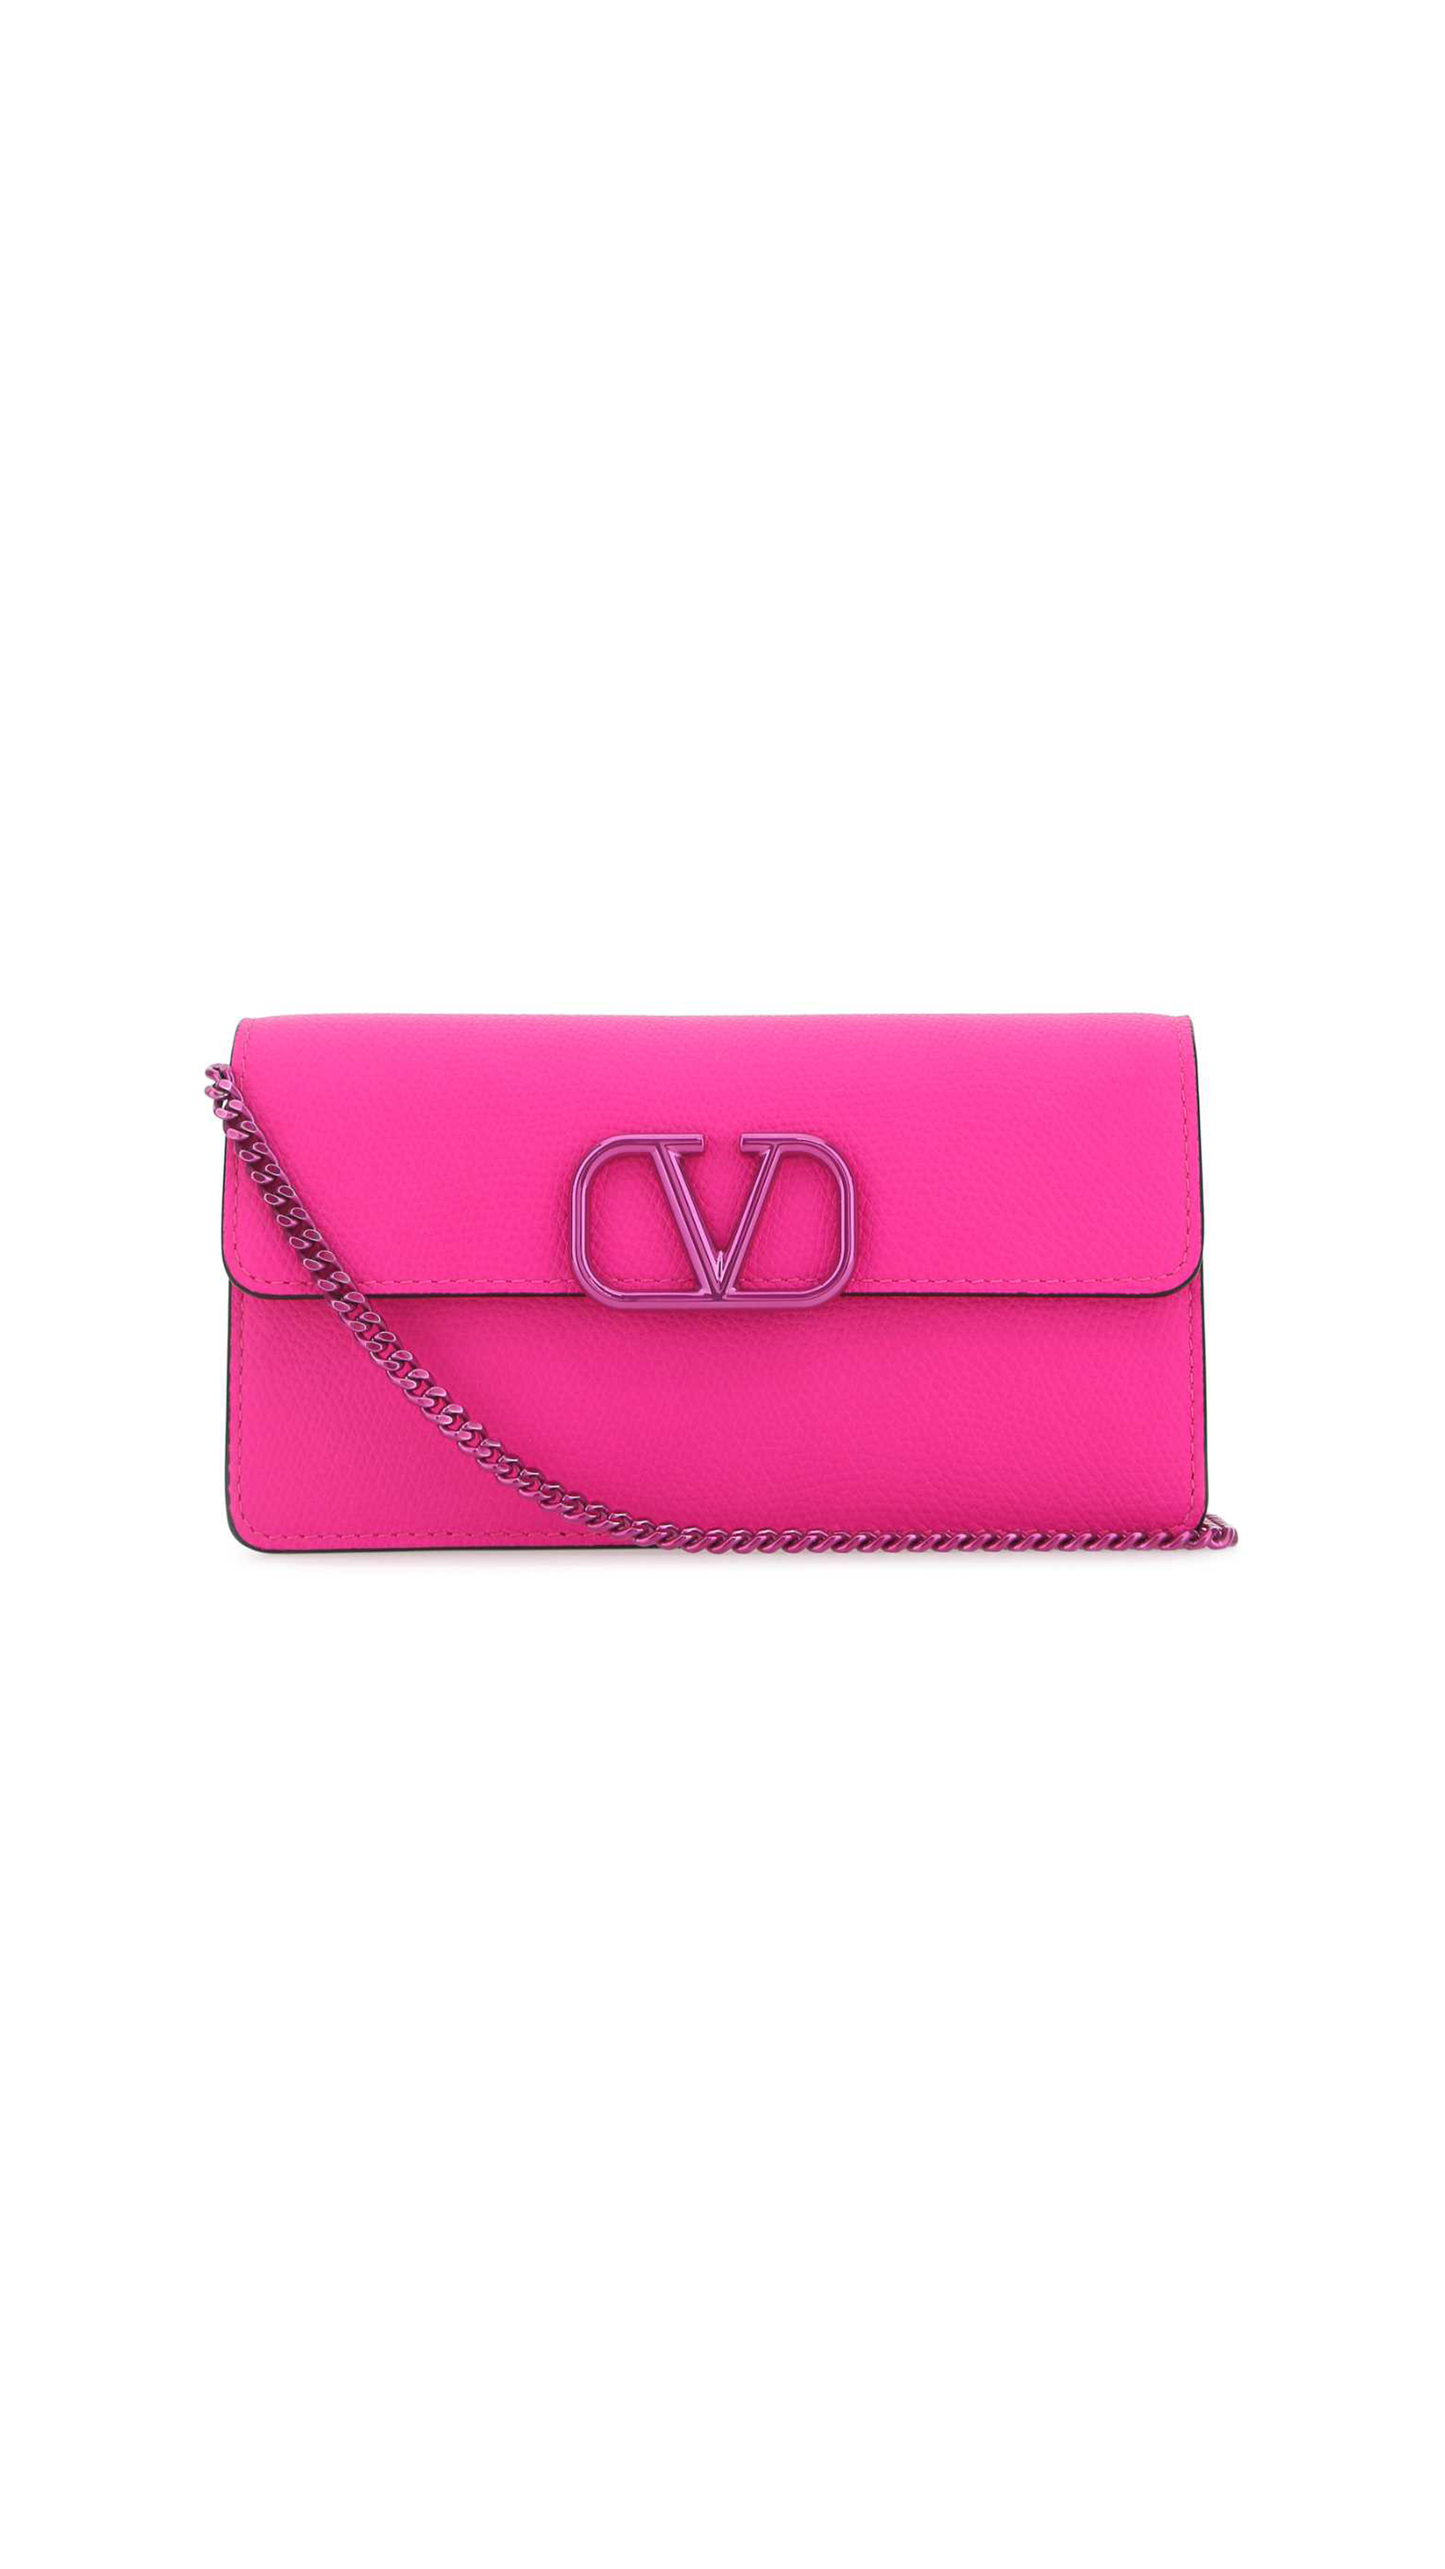 Vlogo Signature Grainy Calfskin Wallet With Chain - Pink PP